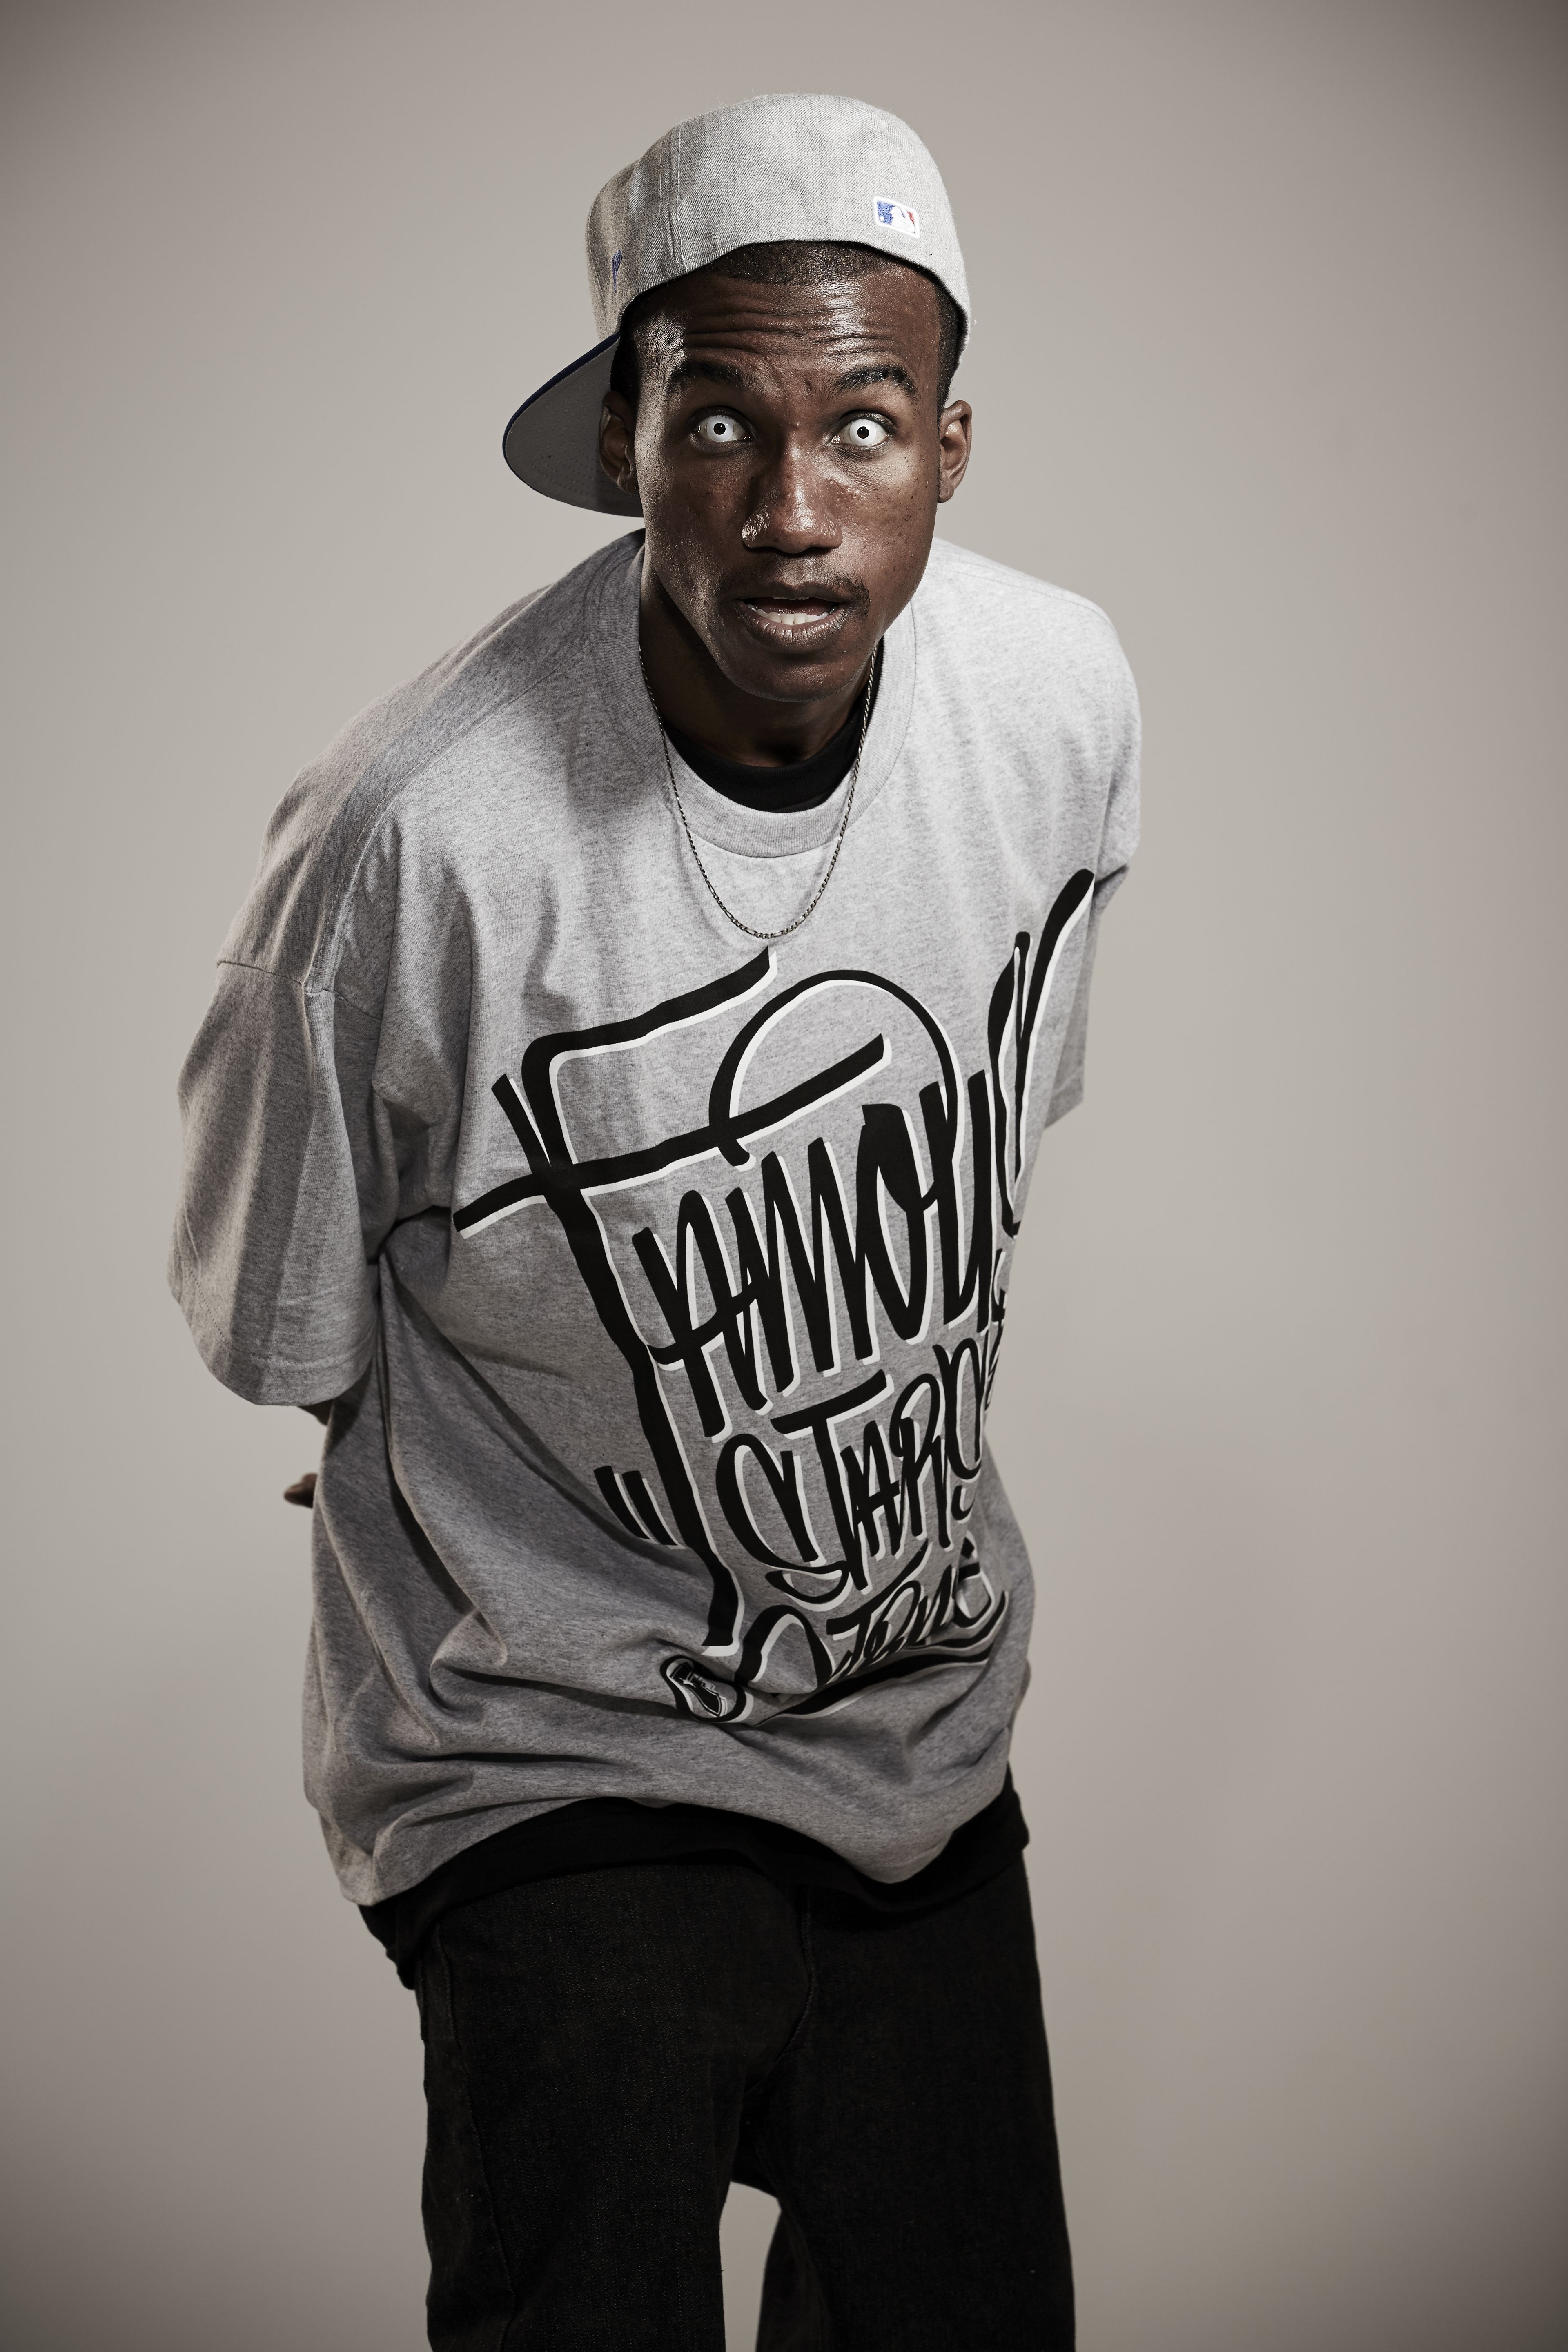 hopsin. visible piercings and have been to Lincoln Center in